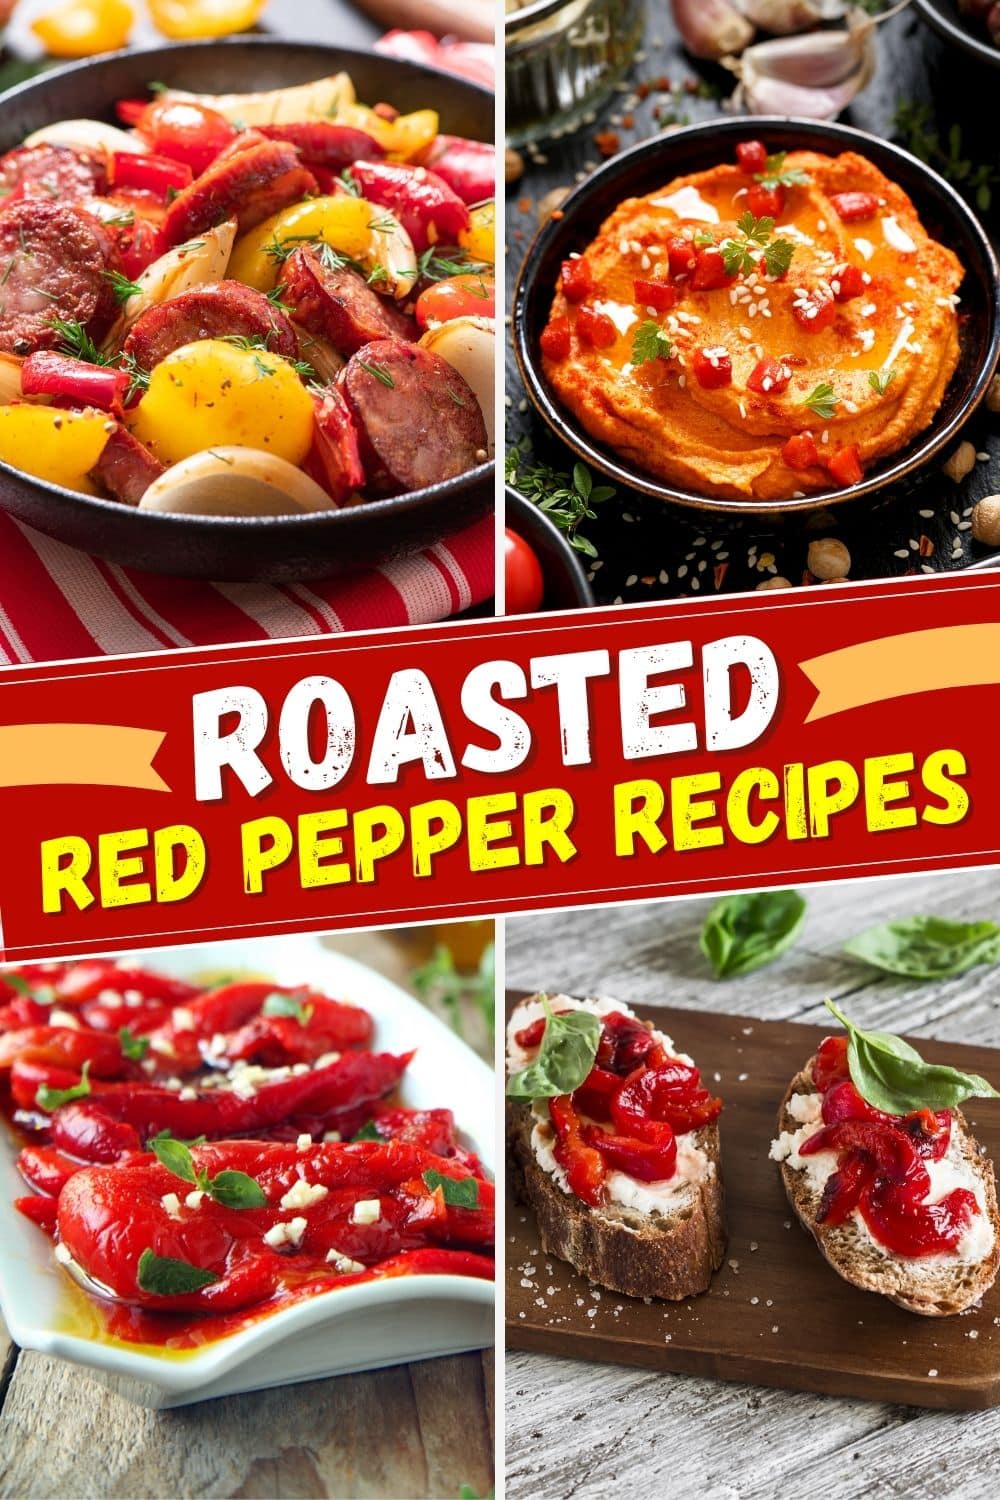 Roasted Red Pepper Recipes 1 